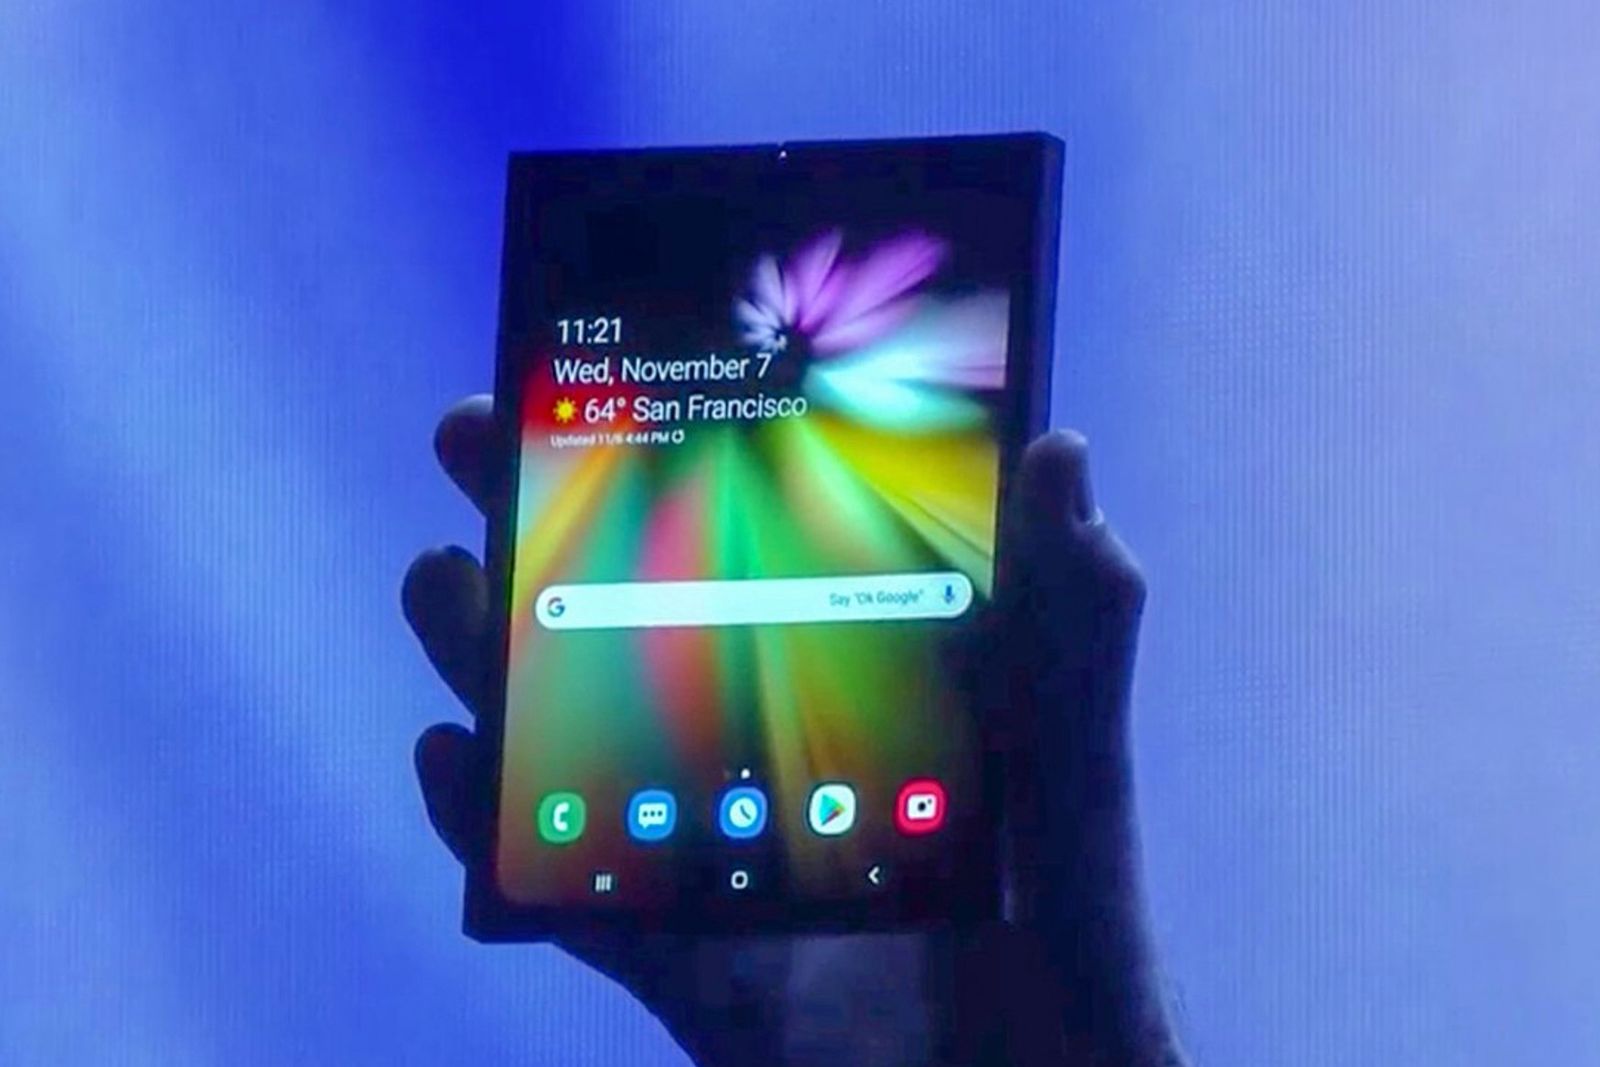 Samsung Shows Off Foldable Phone With An Infinity Flex Display image 1